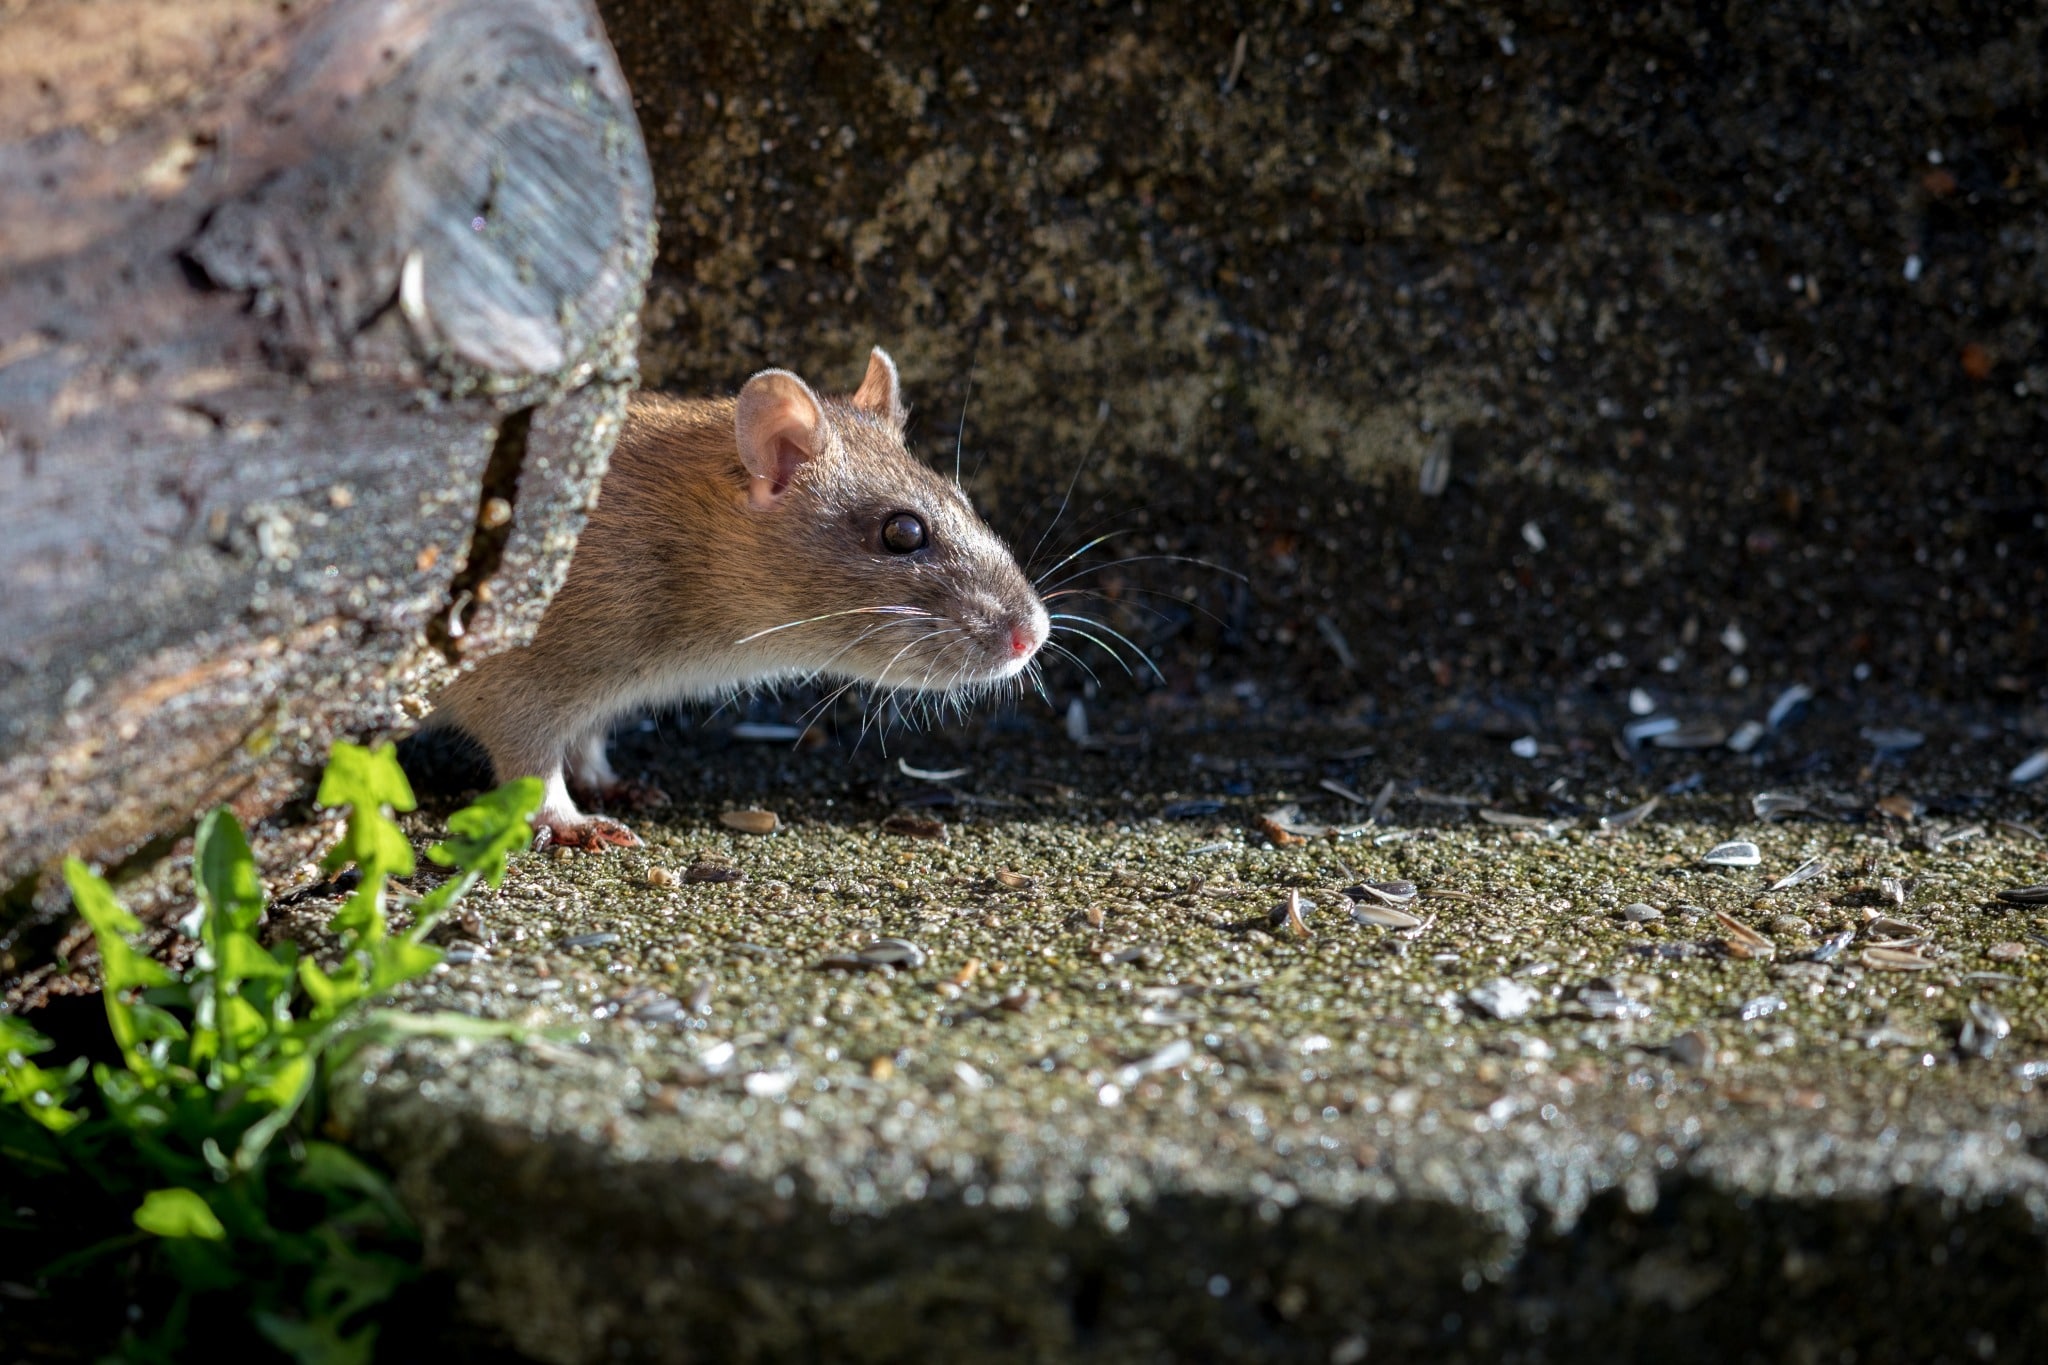 A rat peaking out from behind a rock.